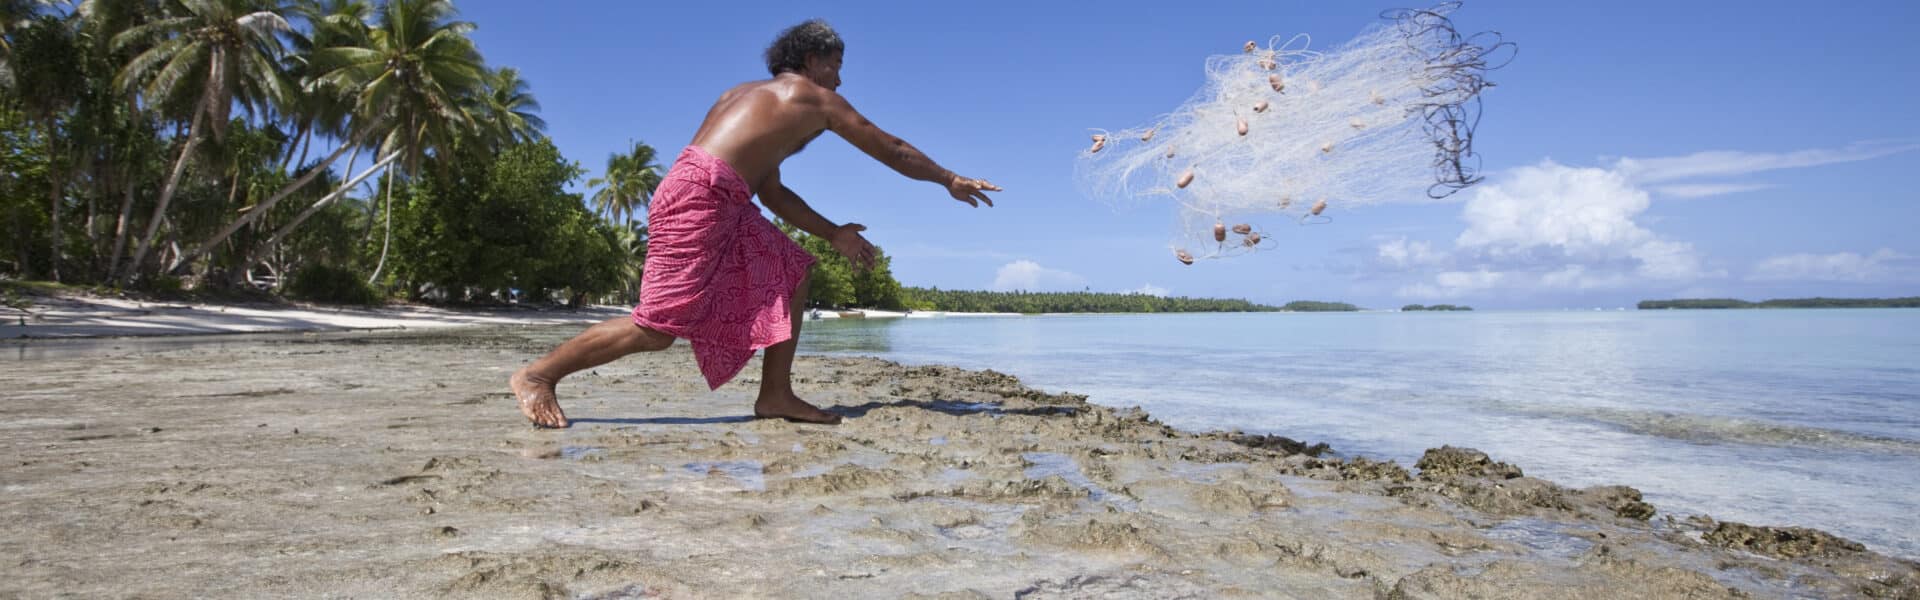 A fisherman on the coast of Funafui, Tuvalu, throwing a weighted net out into the sea water, a traditional form of fishing.